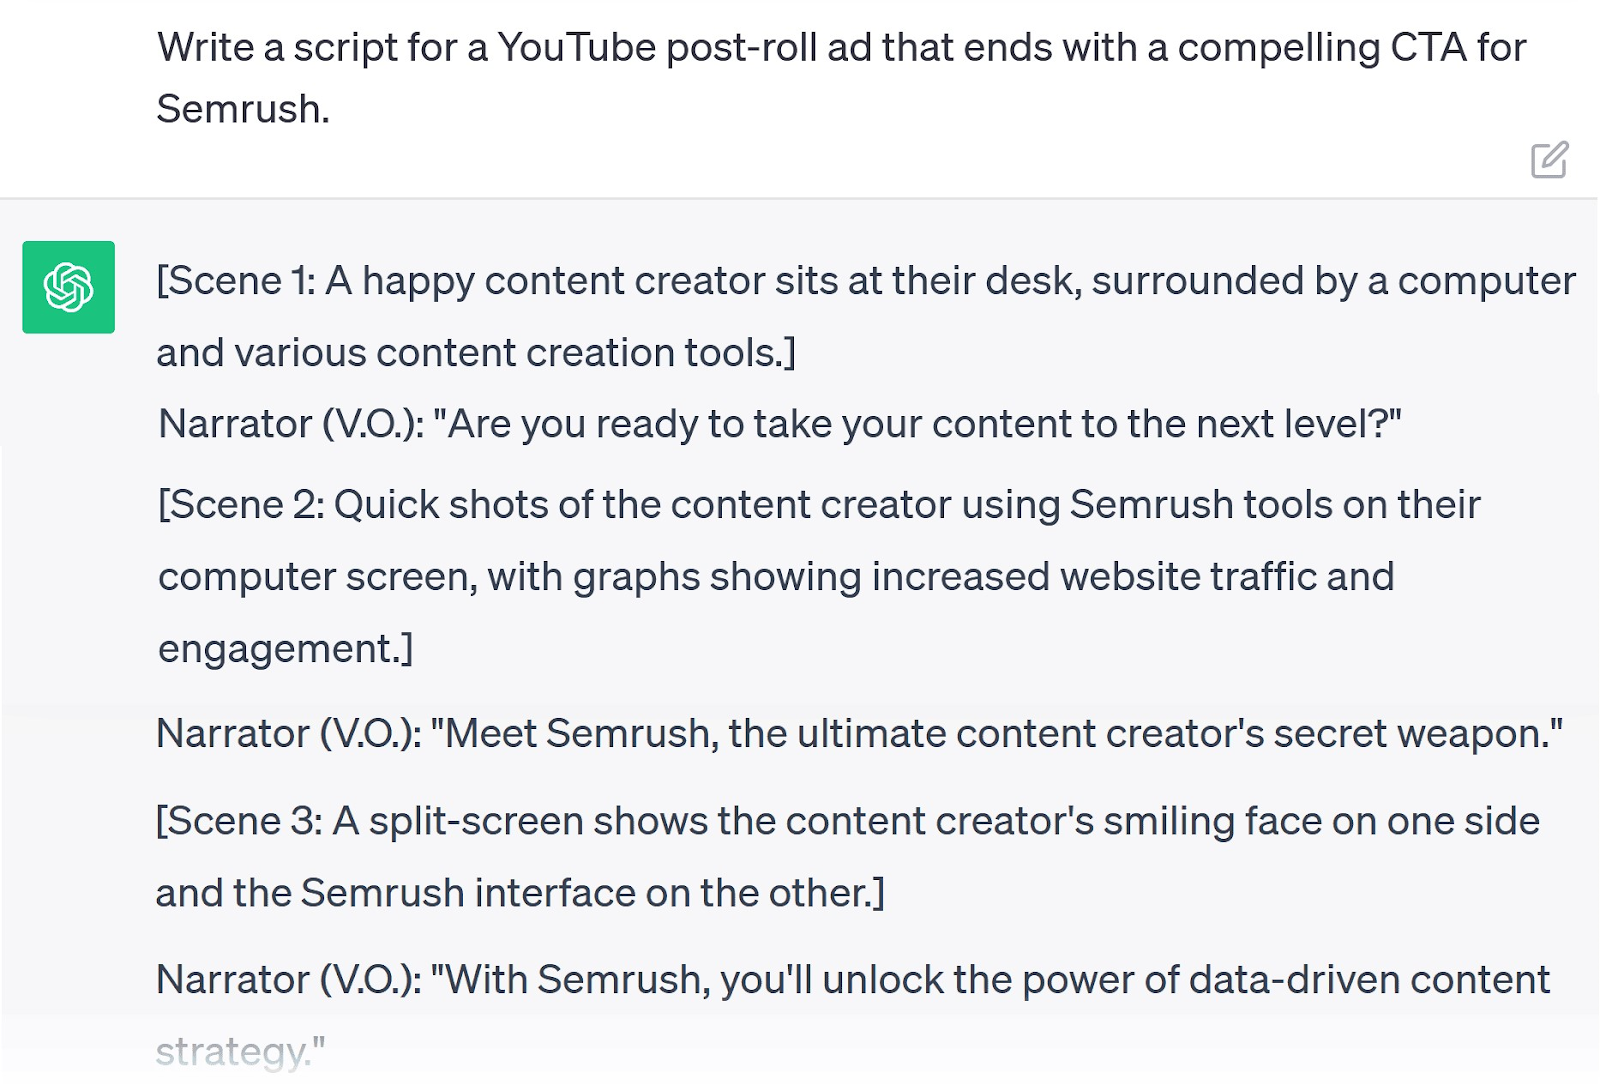 A new prompt asking ChatGPT to write a script for a YouTube post-roll ad